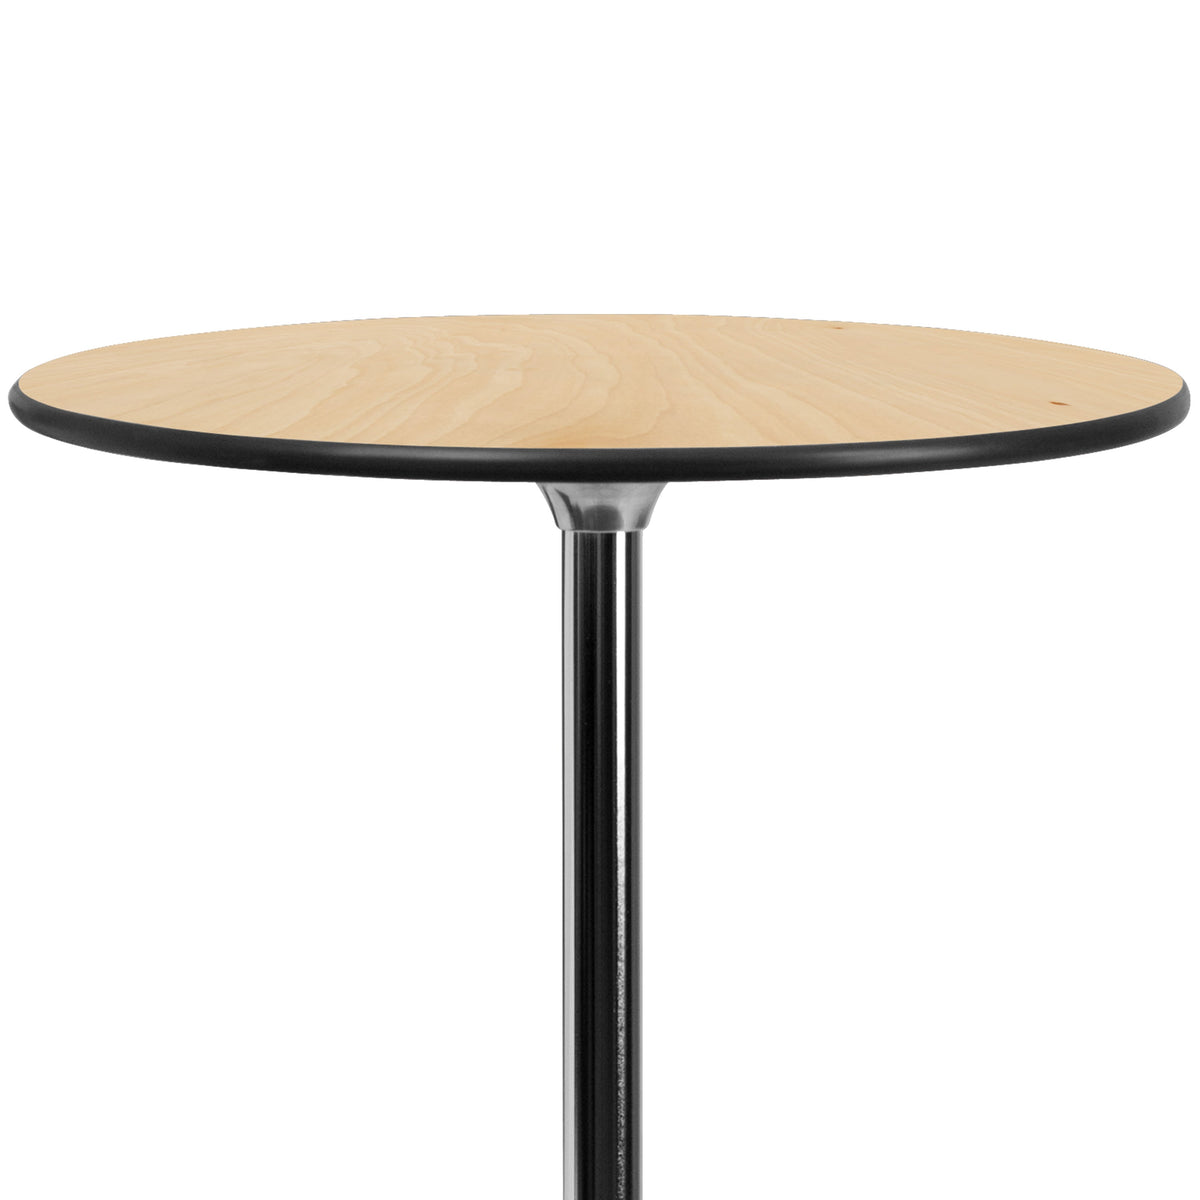 Natural |#| 24" Round Wood Cocktail Table with 30" and 42" Columns